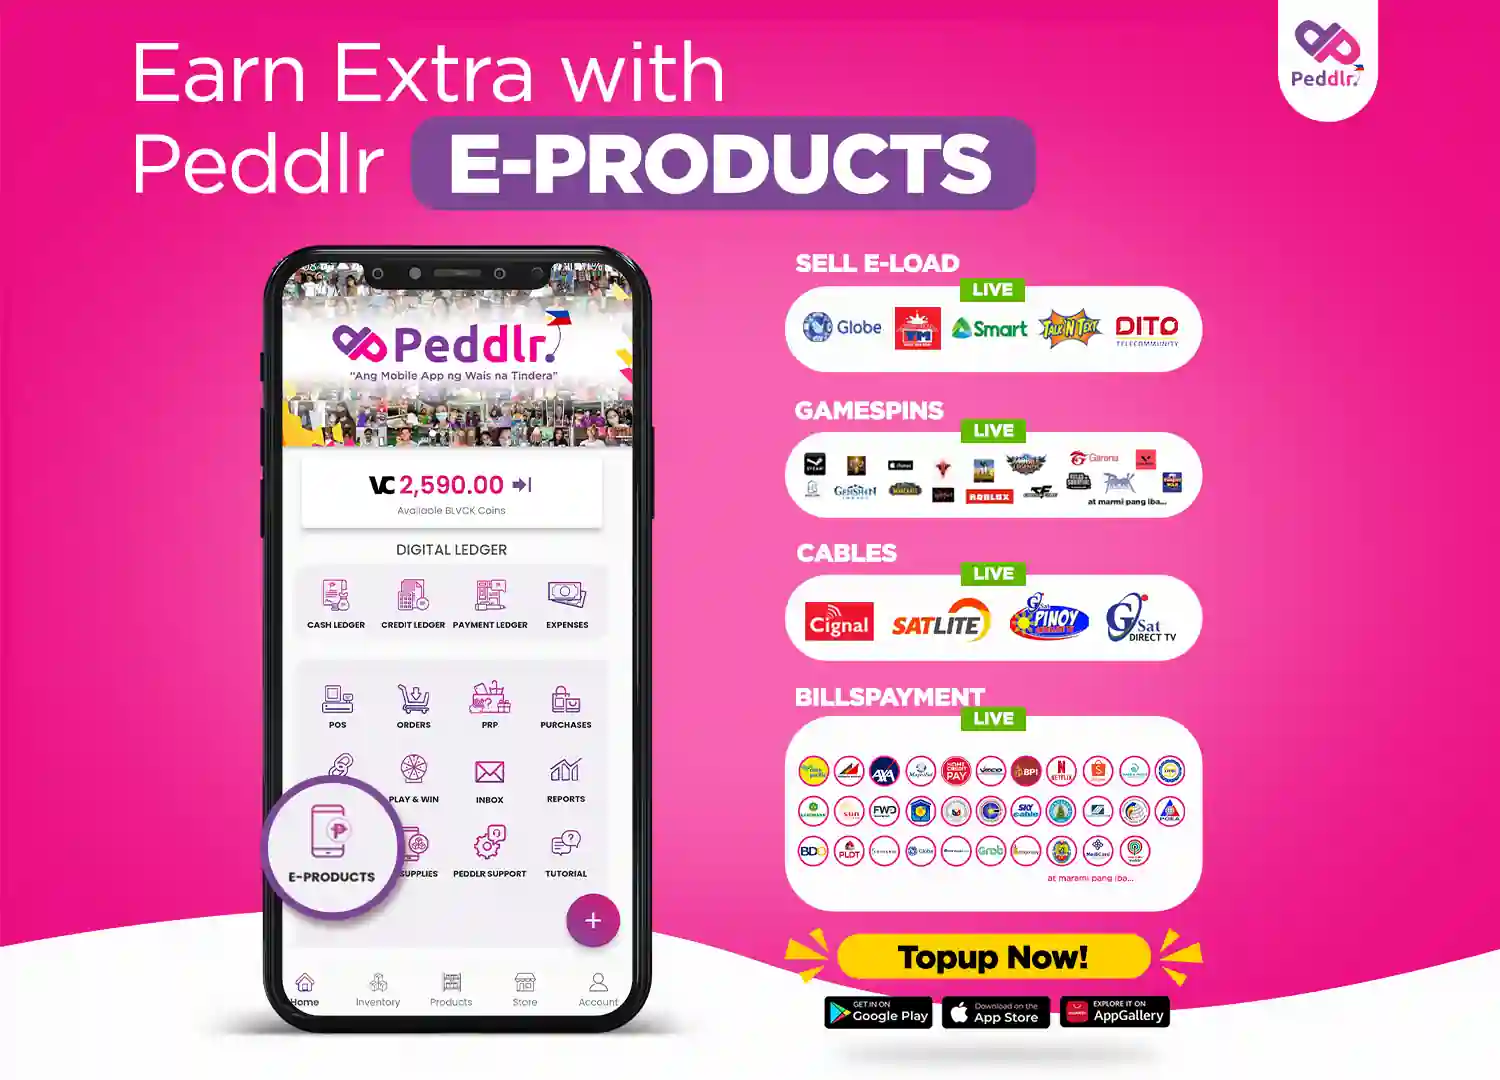 Showing Peddlr e-product feature like e-load, game top-up,cables, and Billspayment